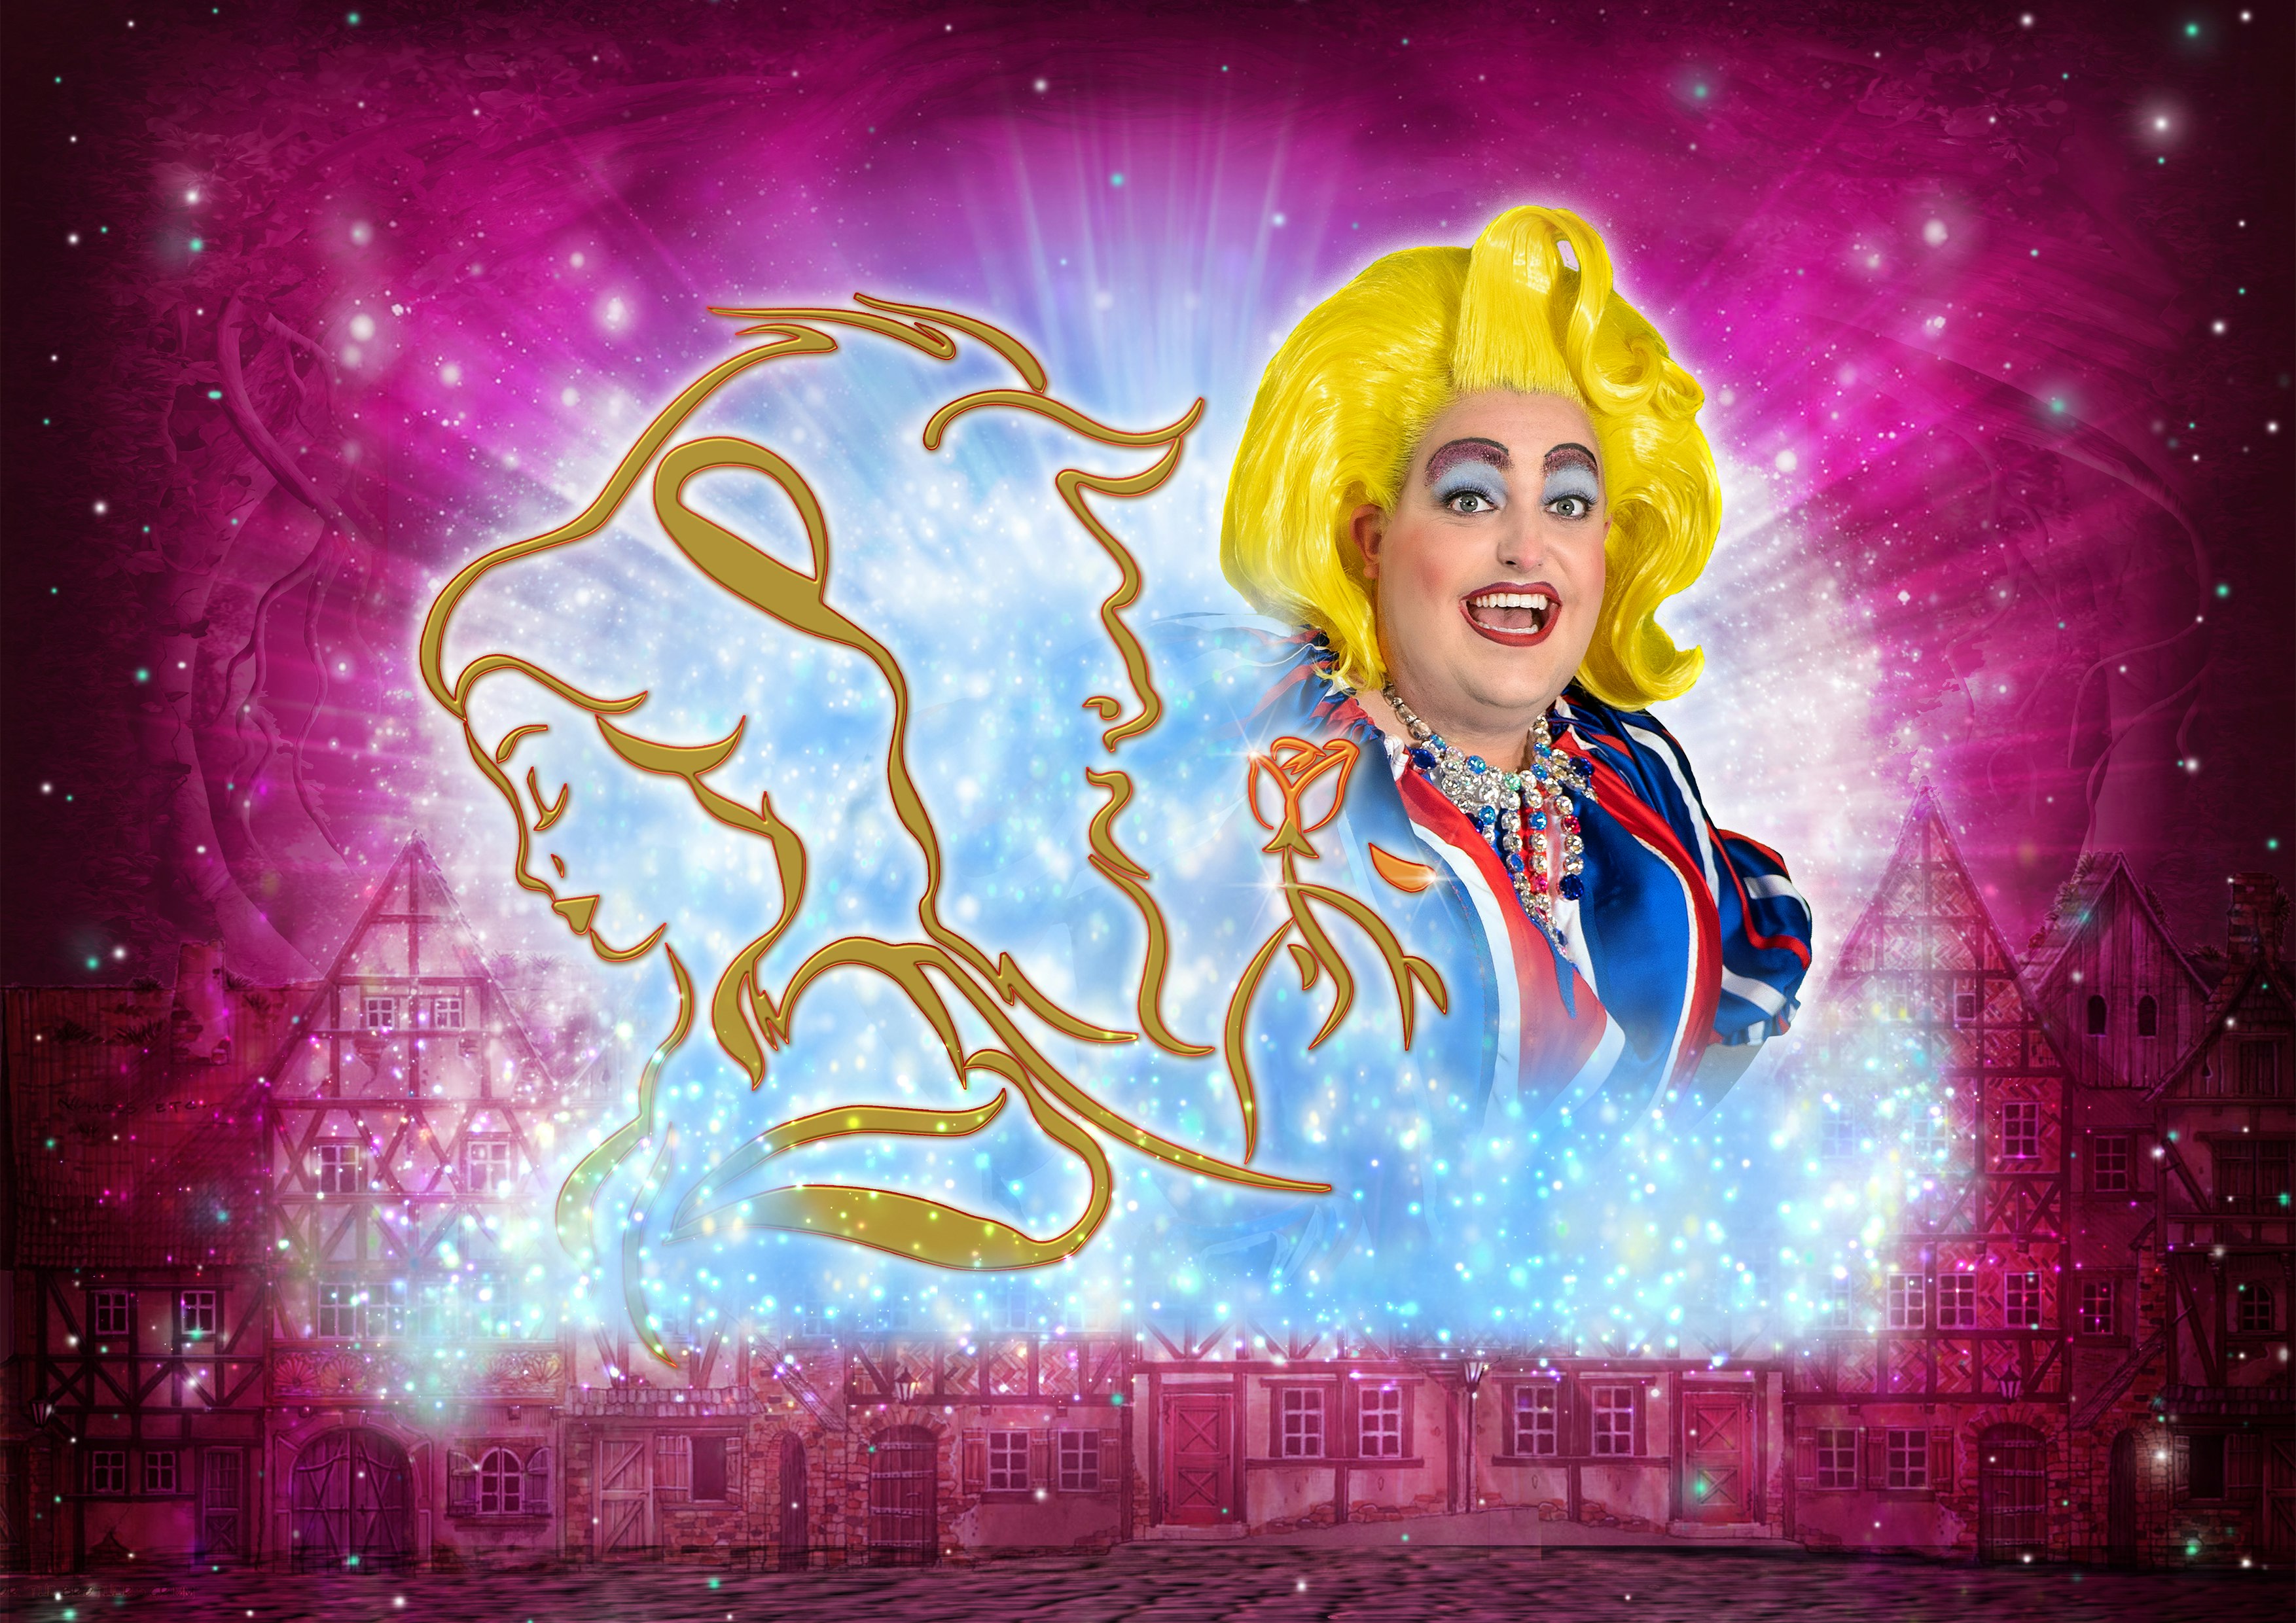 A promotional shot for the Easter Panto at Anvil Arts, Beauty and the Beast. A headshot of a pantomime character wearing a blonde wig and blue shirt. The background is purple with sparkles. Next to the character is an illustration in gold of Beauty and the Beast.